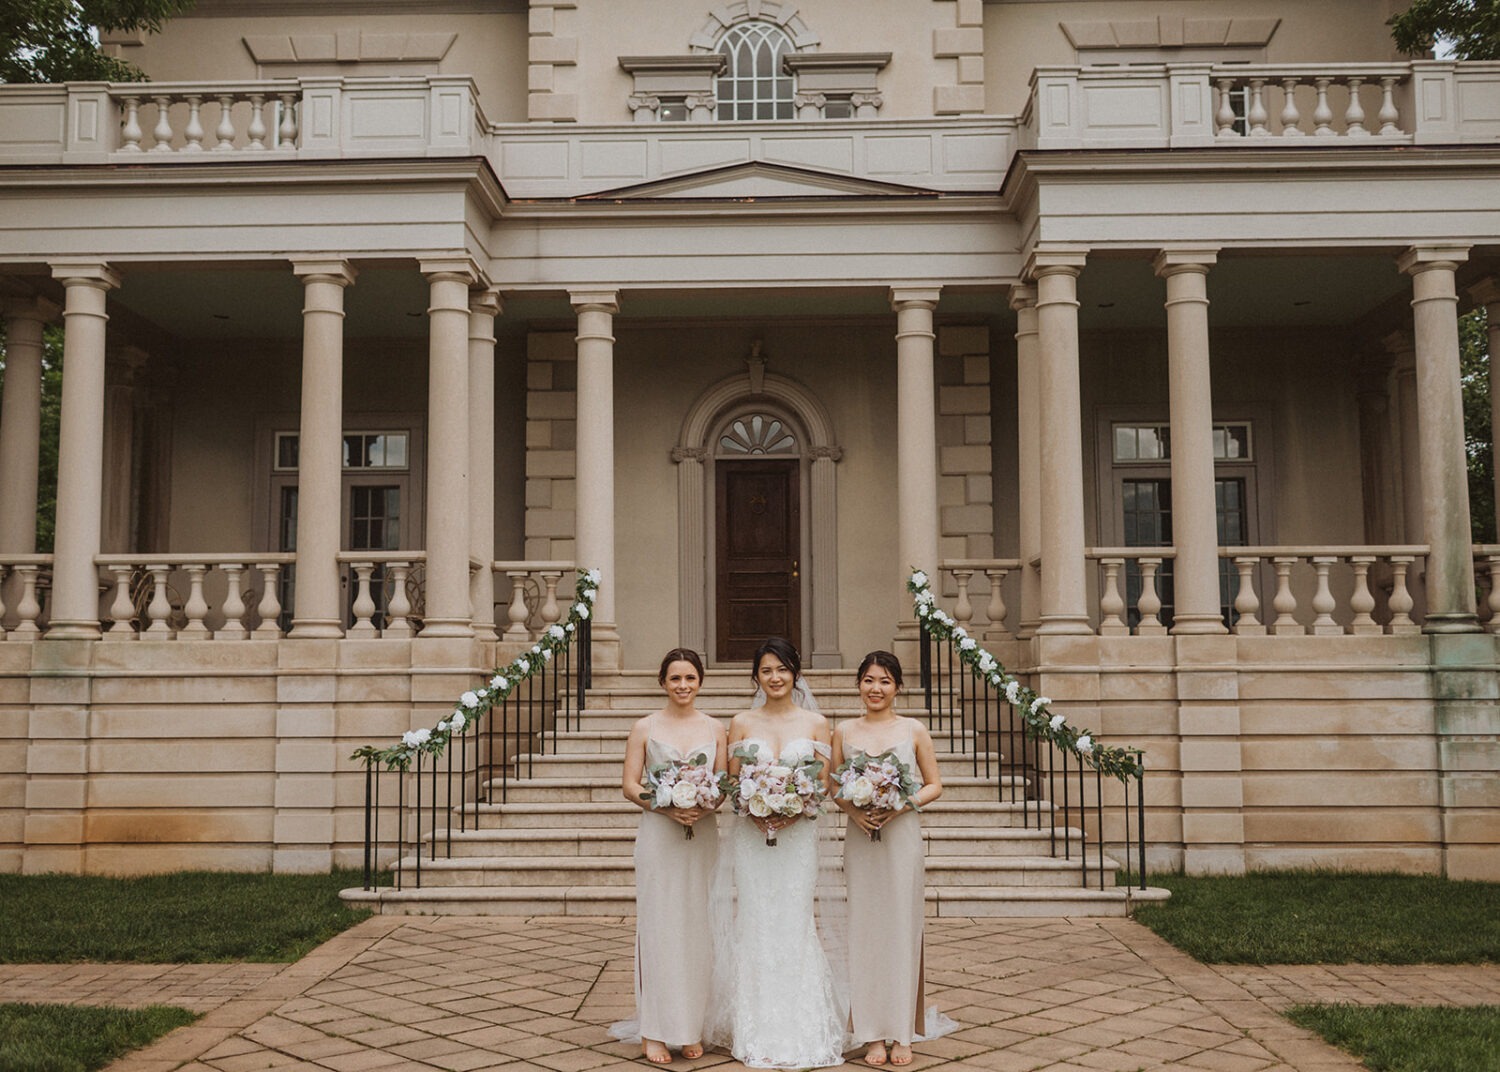 bride stands with bridesmaids holding bouquets at Virginia wedding venue